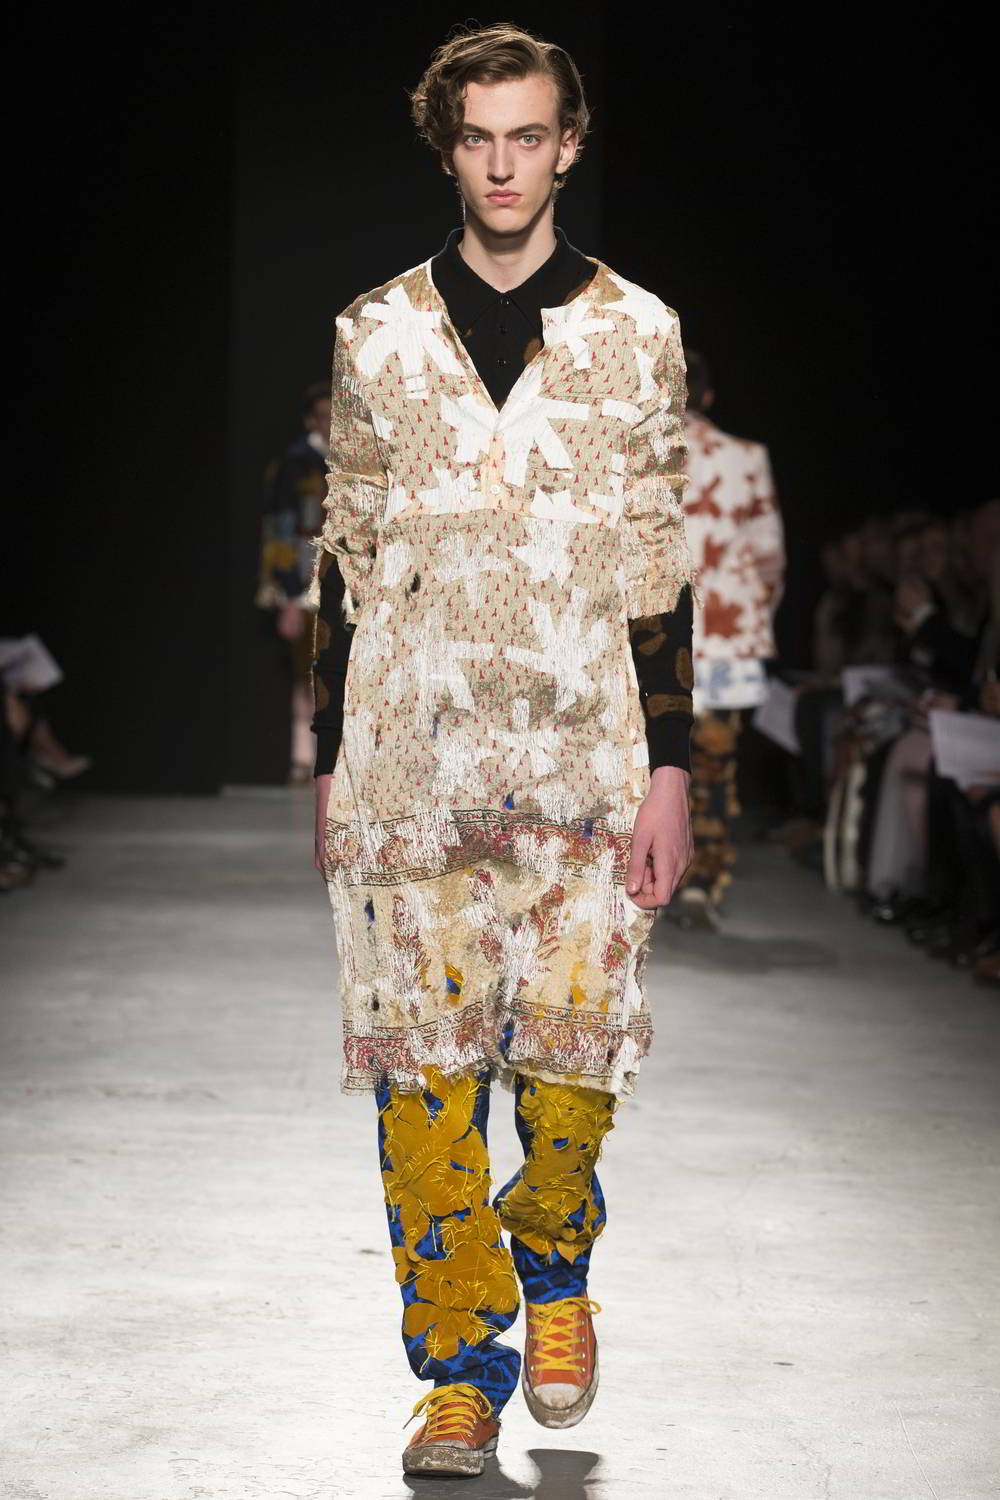 Lydia Smith Runway Show - Westminster University | Male Fashion Trends